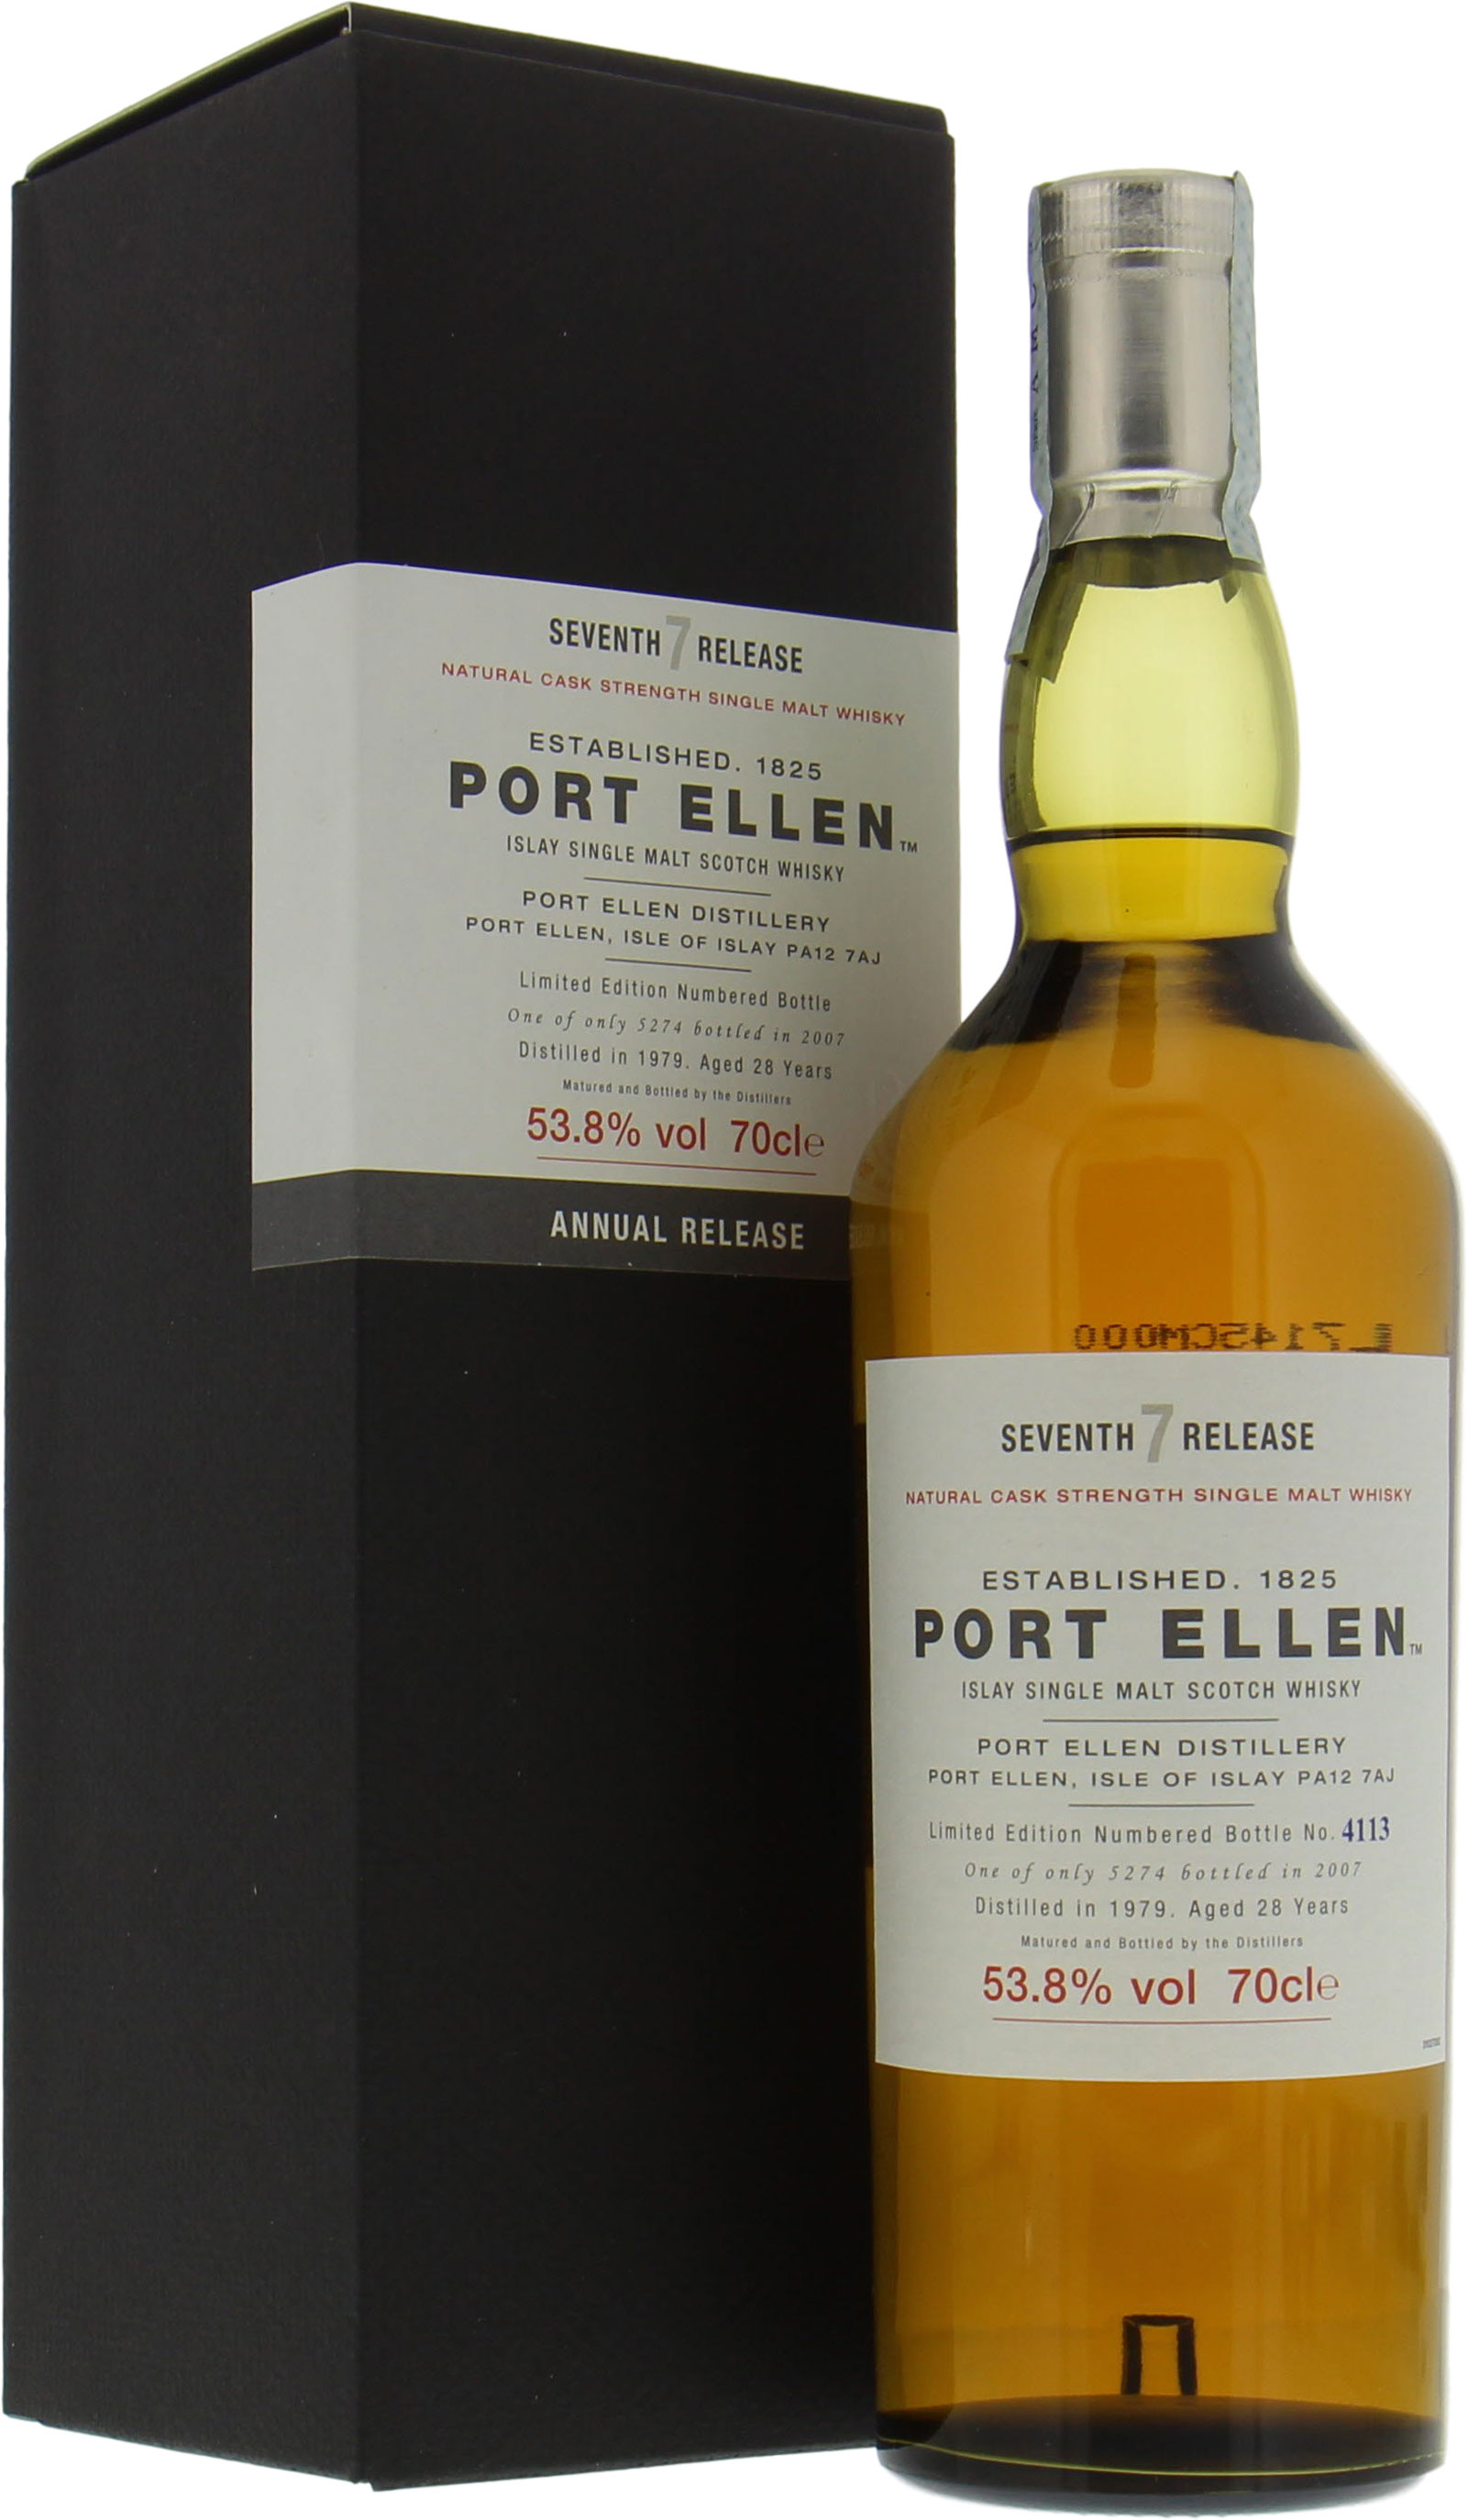 Port Ellen - 7th Annual Release 28 Years Old 53.8% 1979 10001